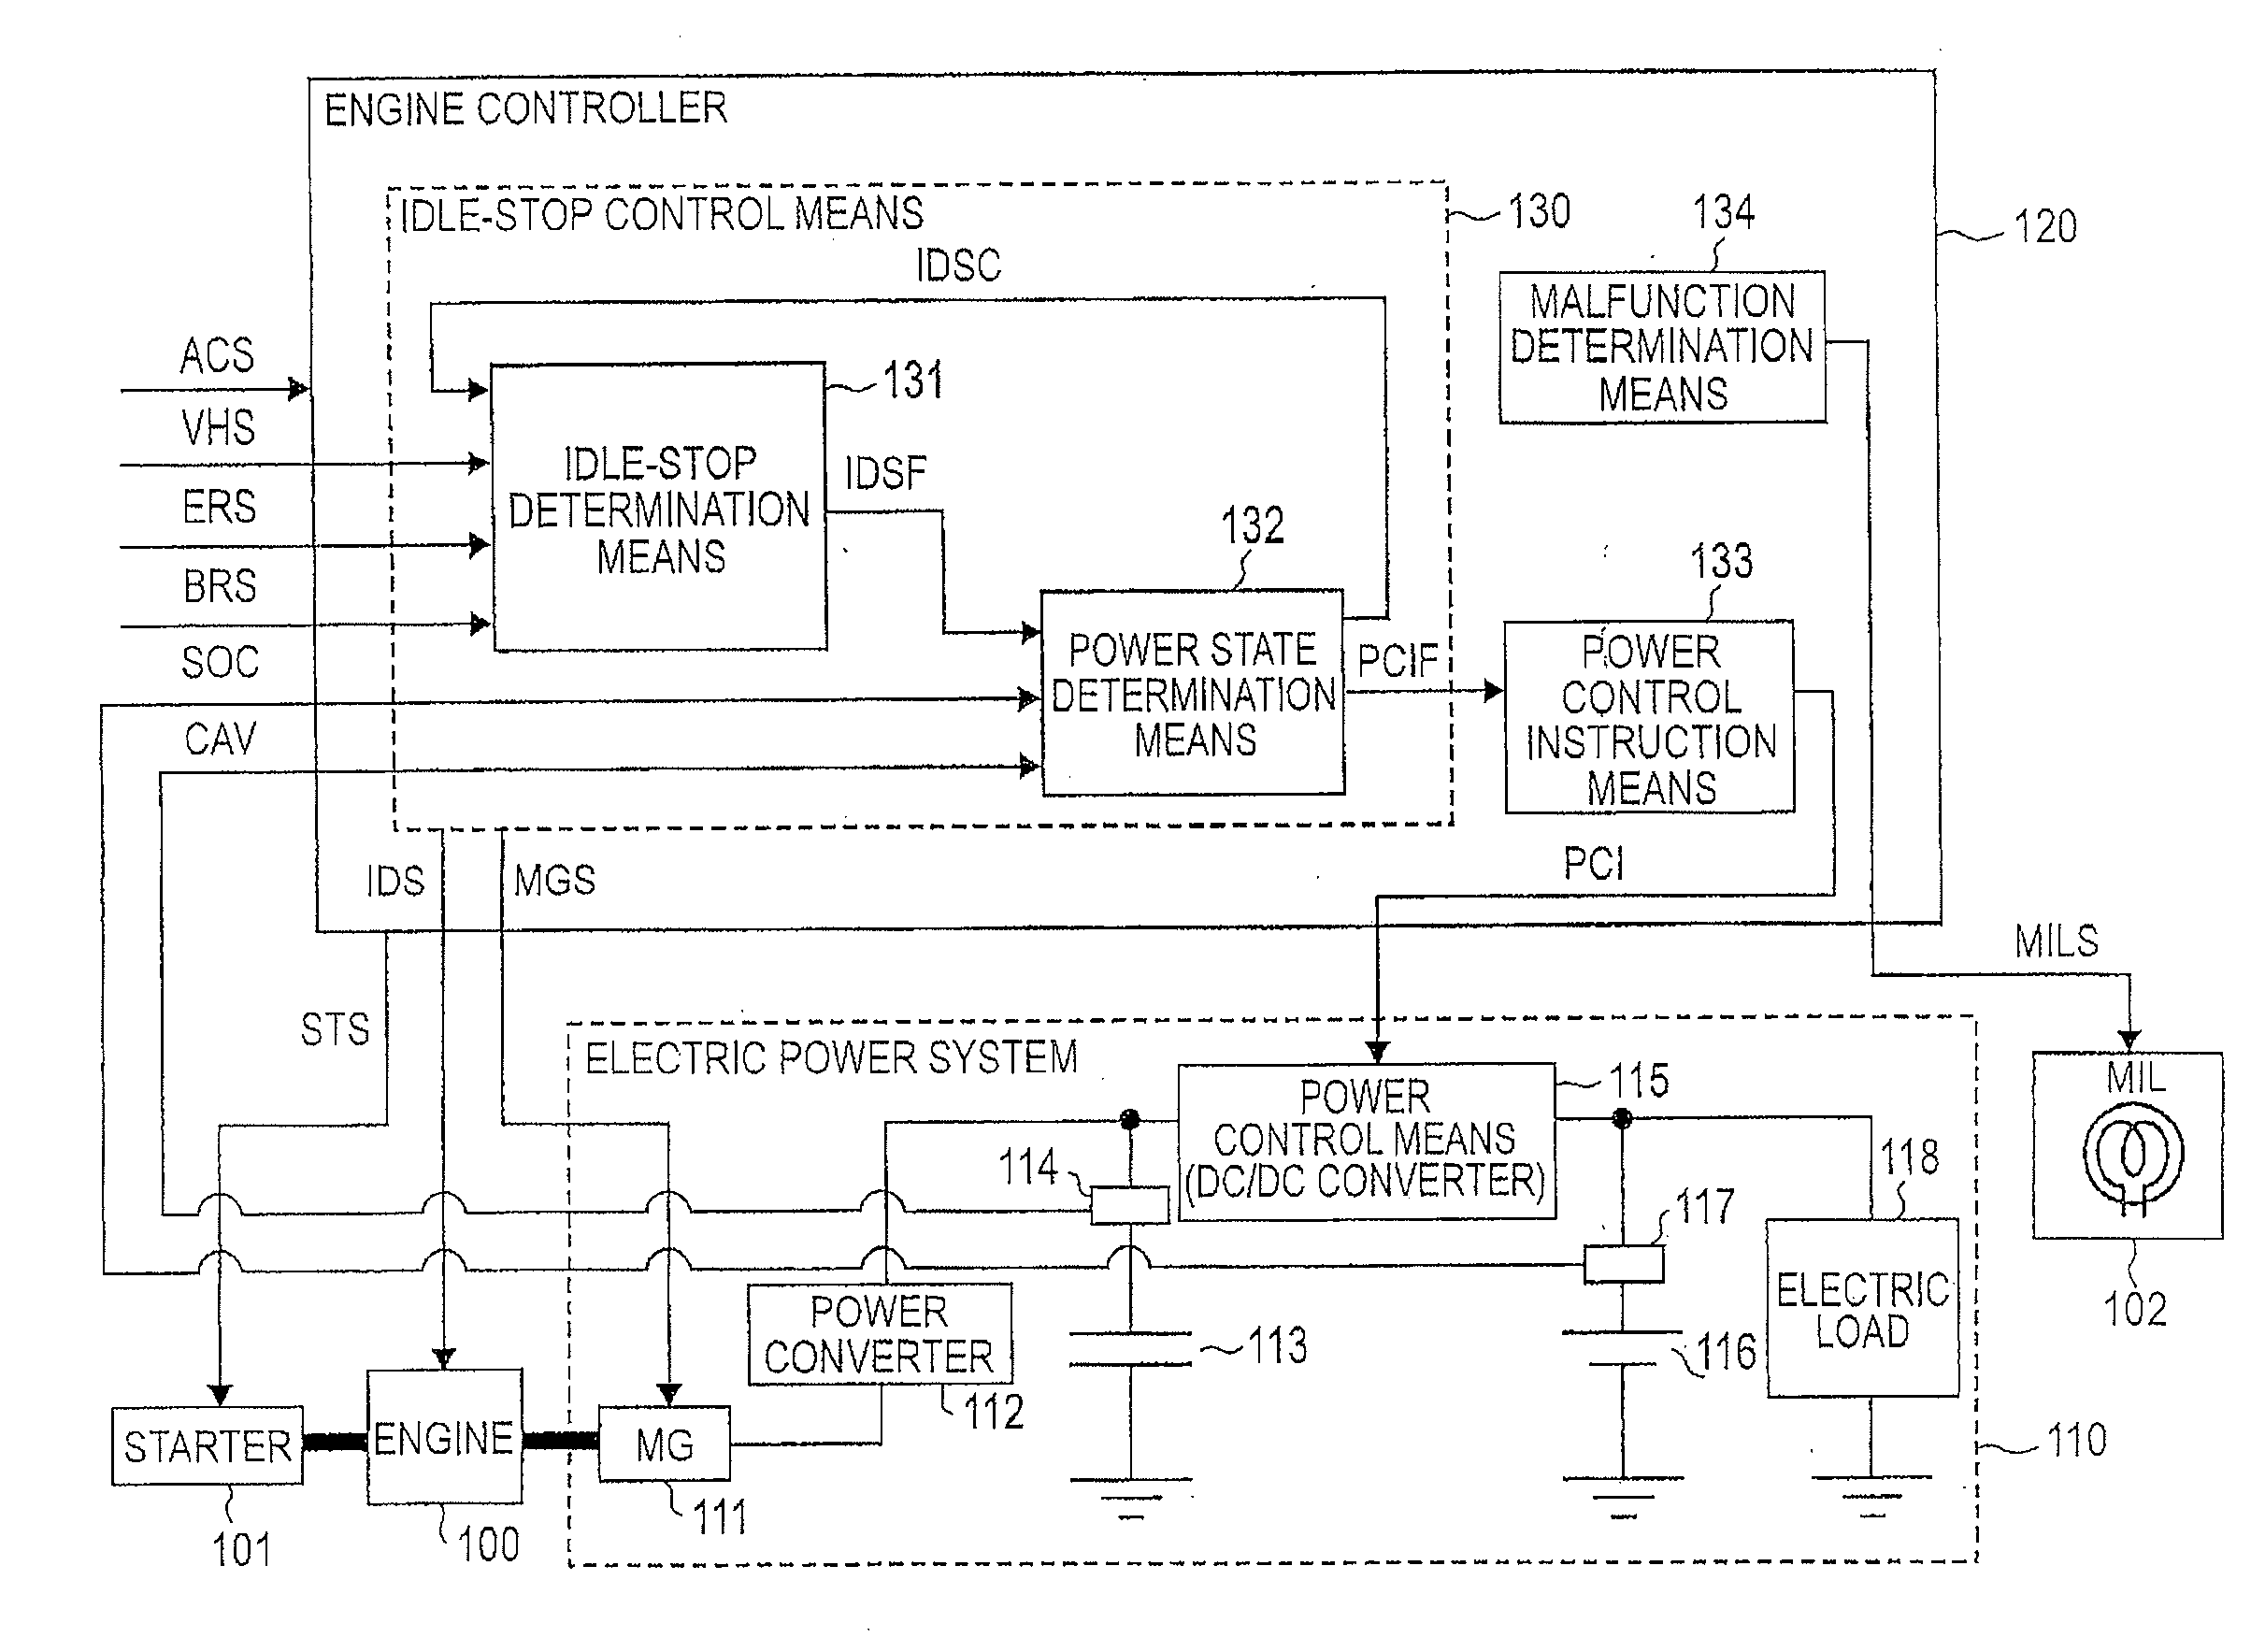 Electric power controller for vehicle with stop start system